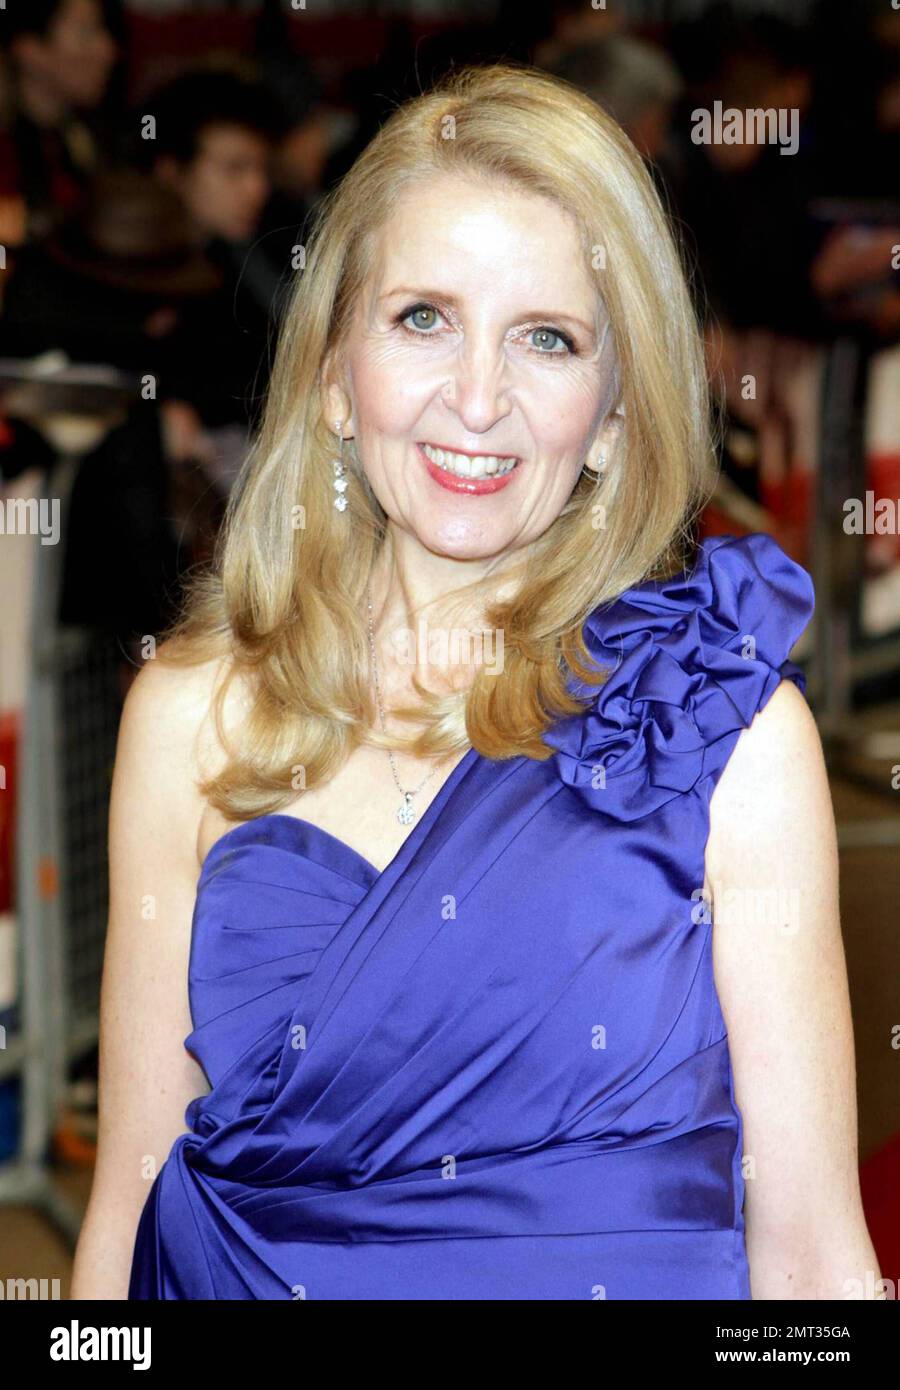 Gillian McKeith attends the UK premiere of 'Morning Glory' at the Empire Leicester Square Cinema. London, UK. 1/11/11. Stock Photo